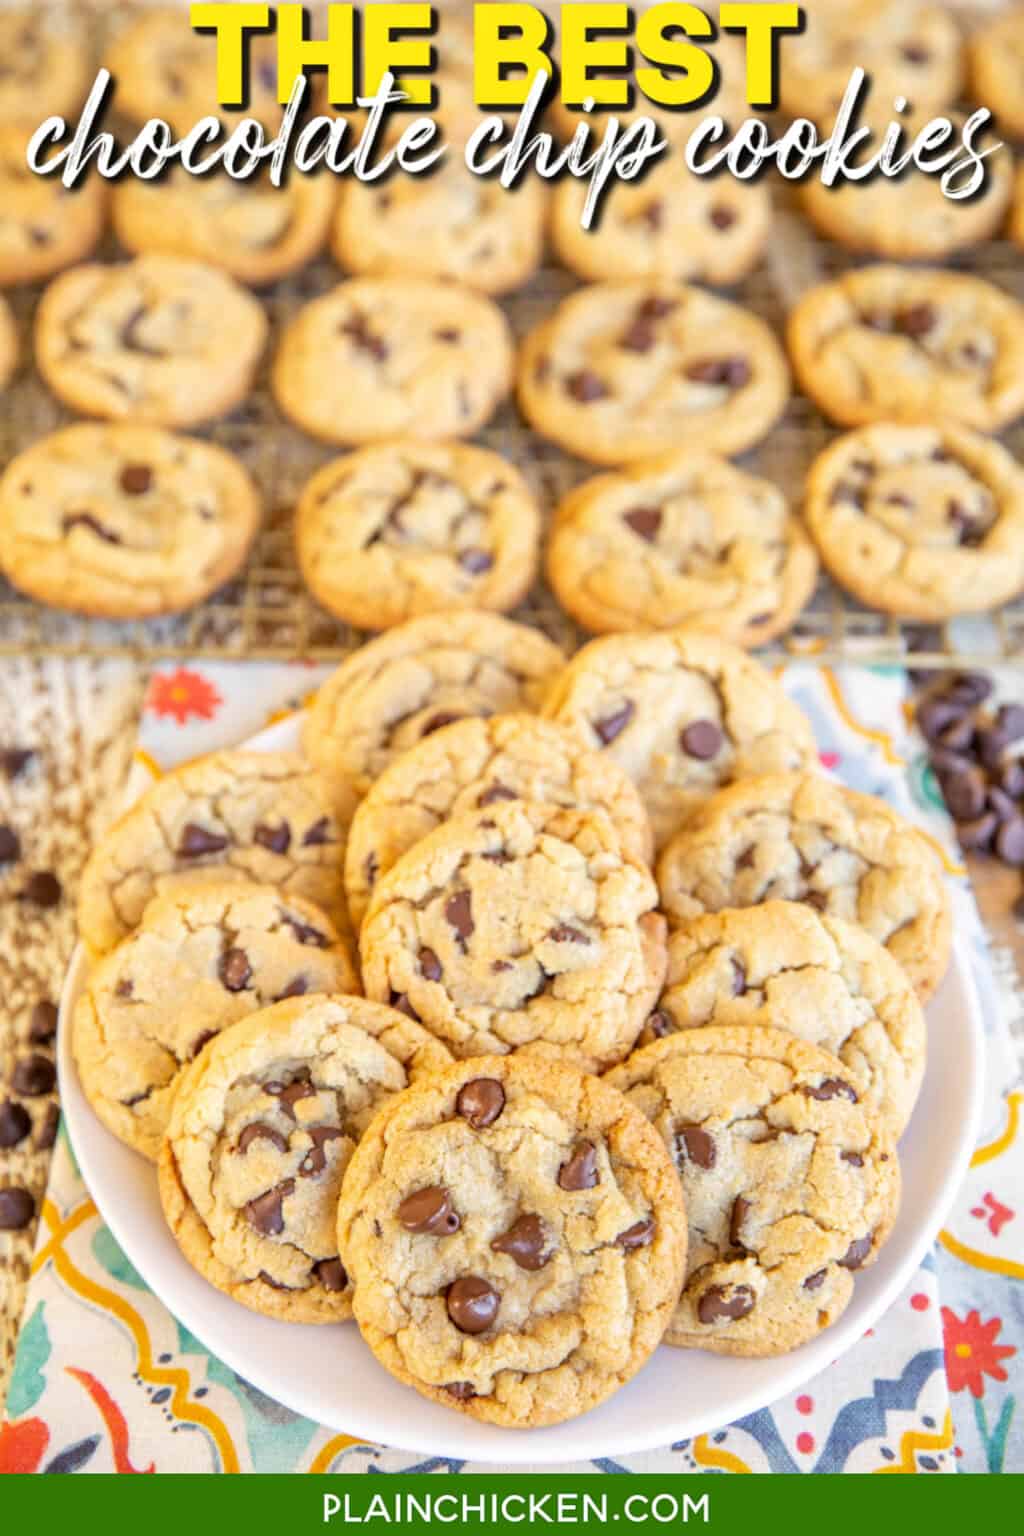 The BEST Chocolate Chip Cookies - Plain Chicken